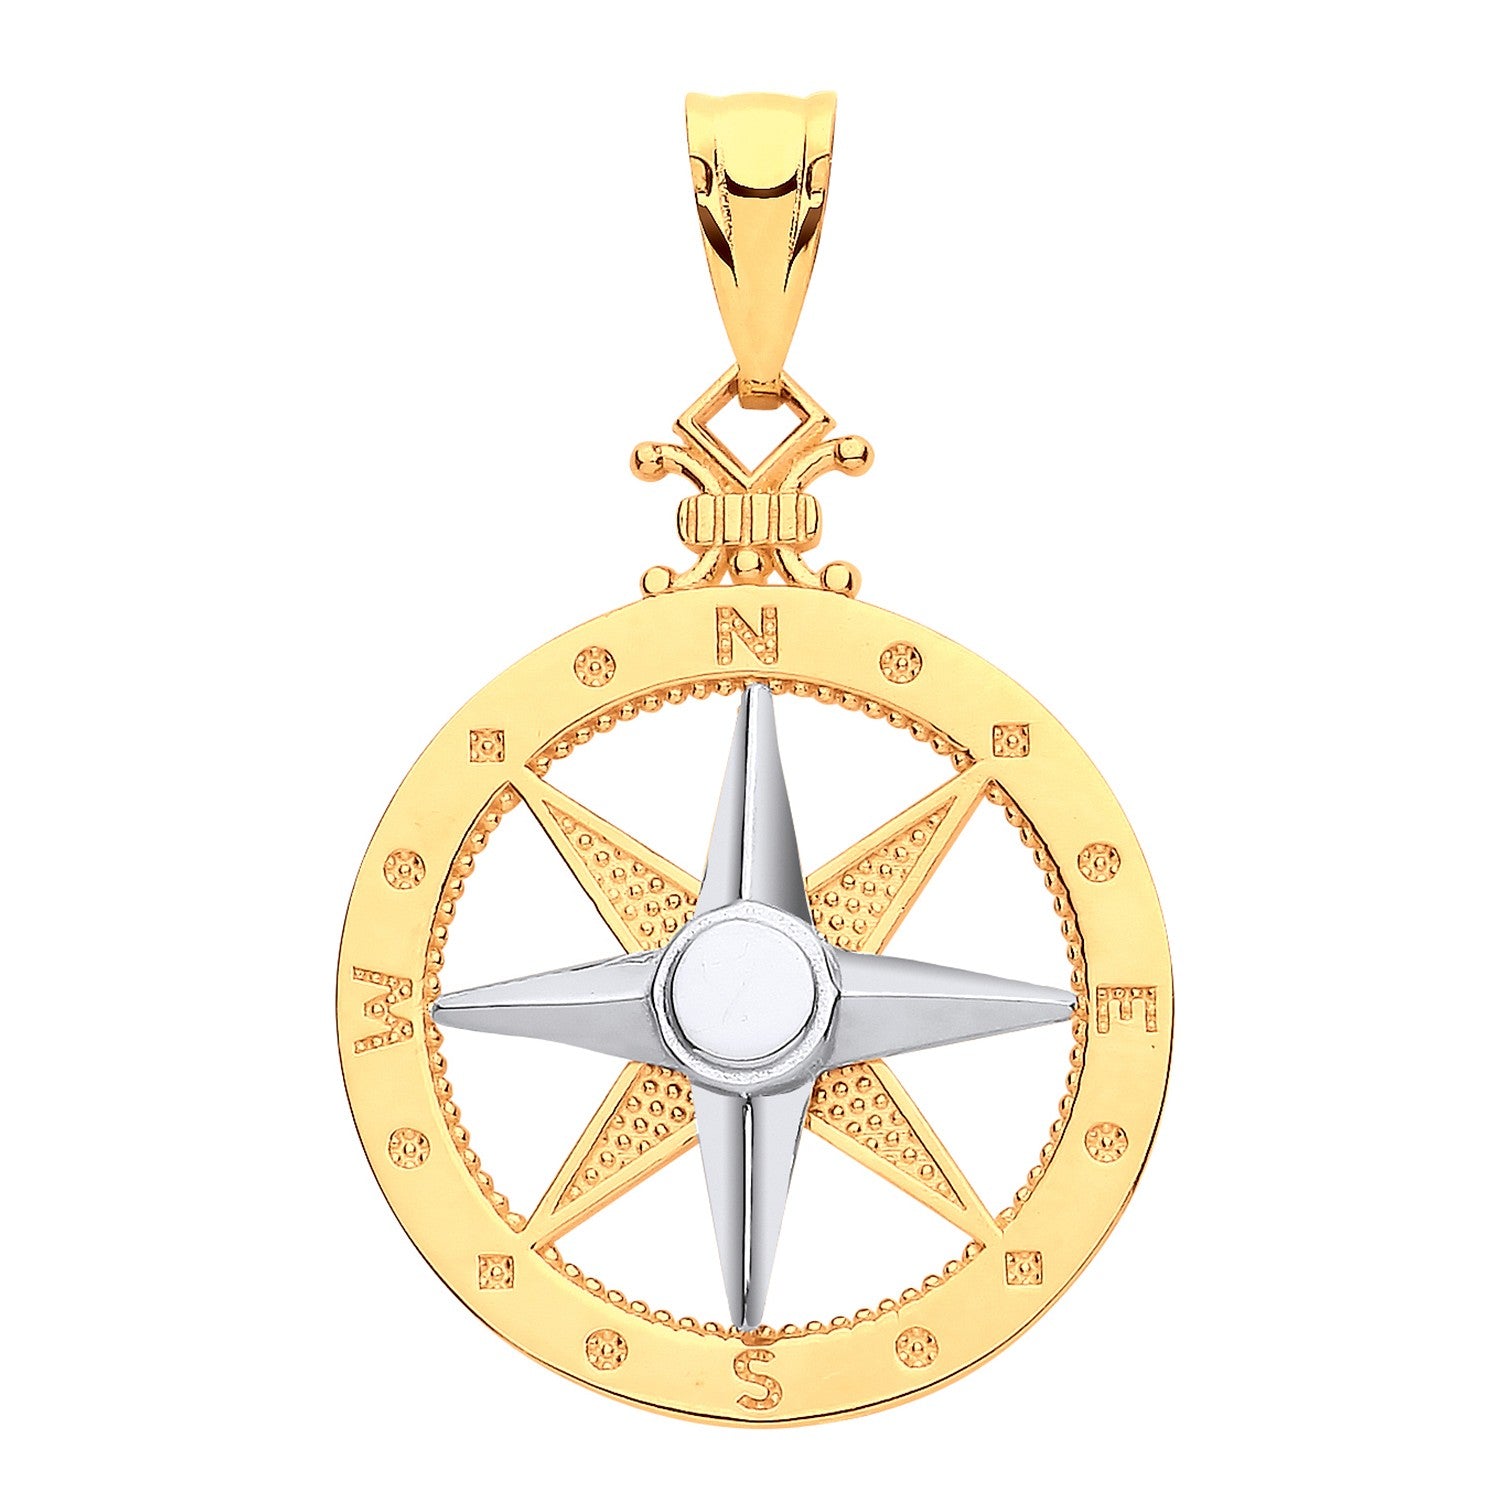 Yellow Gold White Gold Compass Pendant